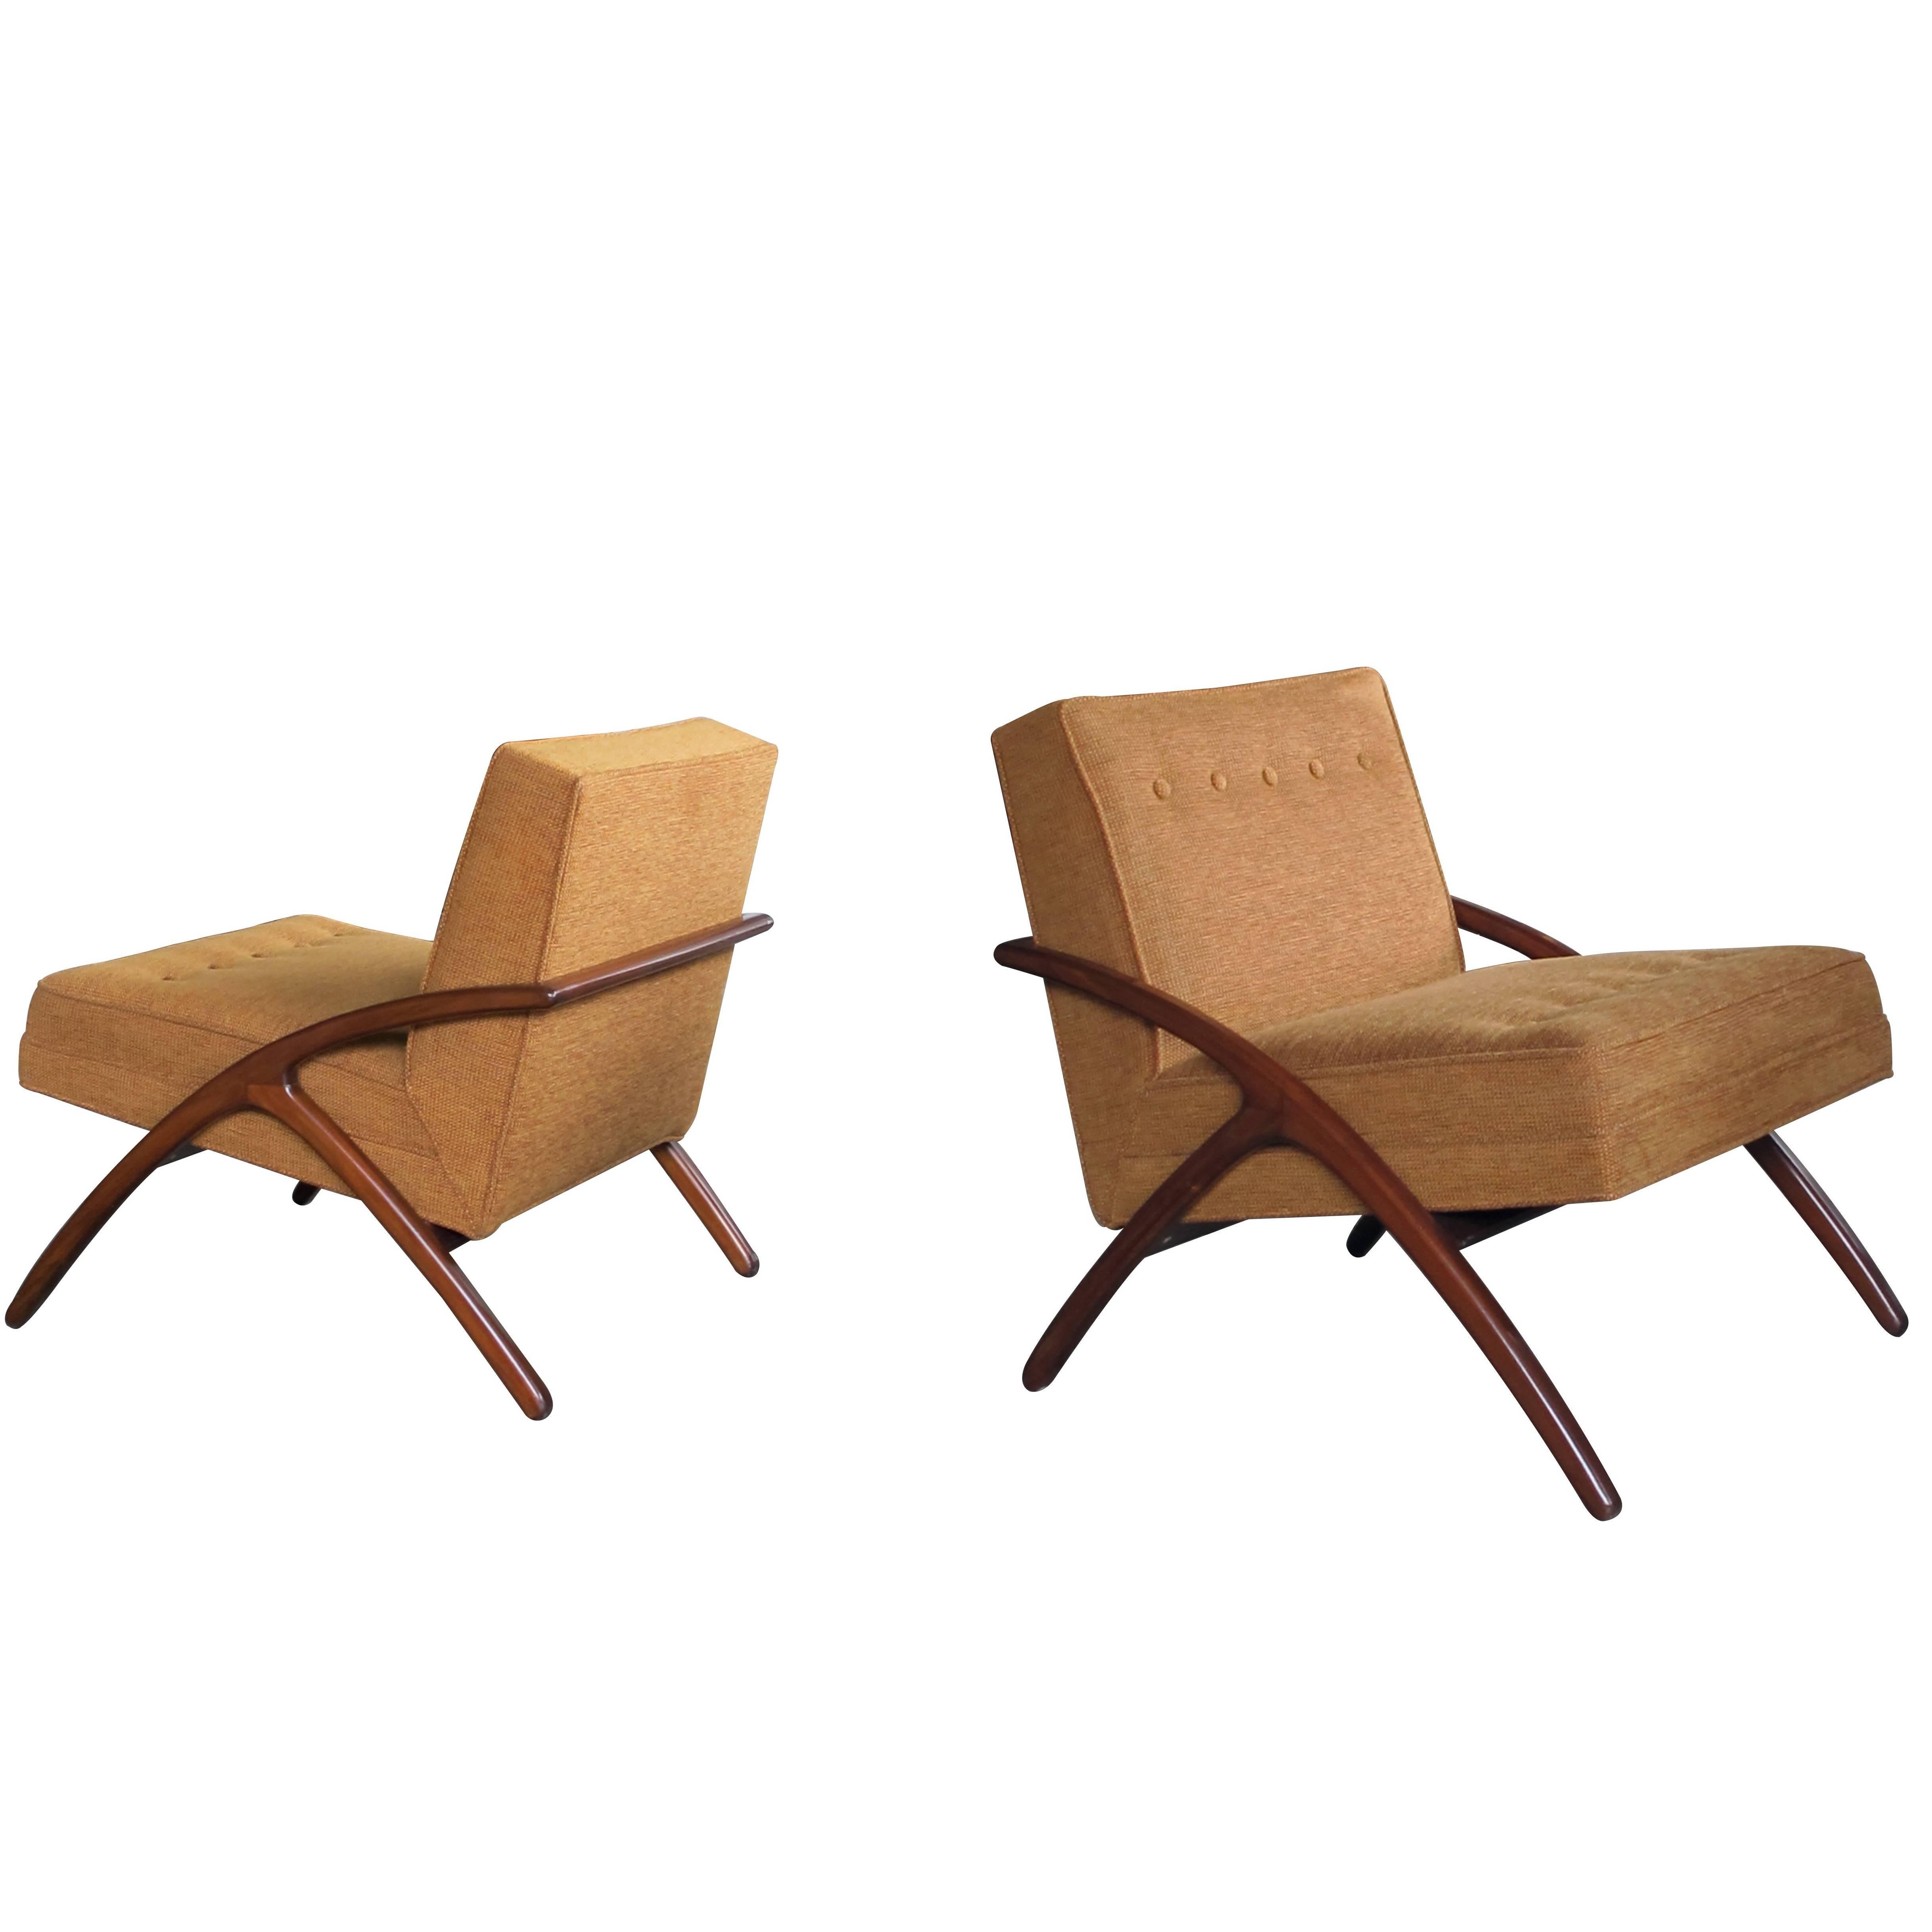 Sleek and Stylish Pair of American 1960s Ash Grasshopper Chairs